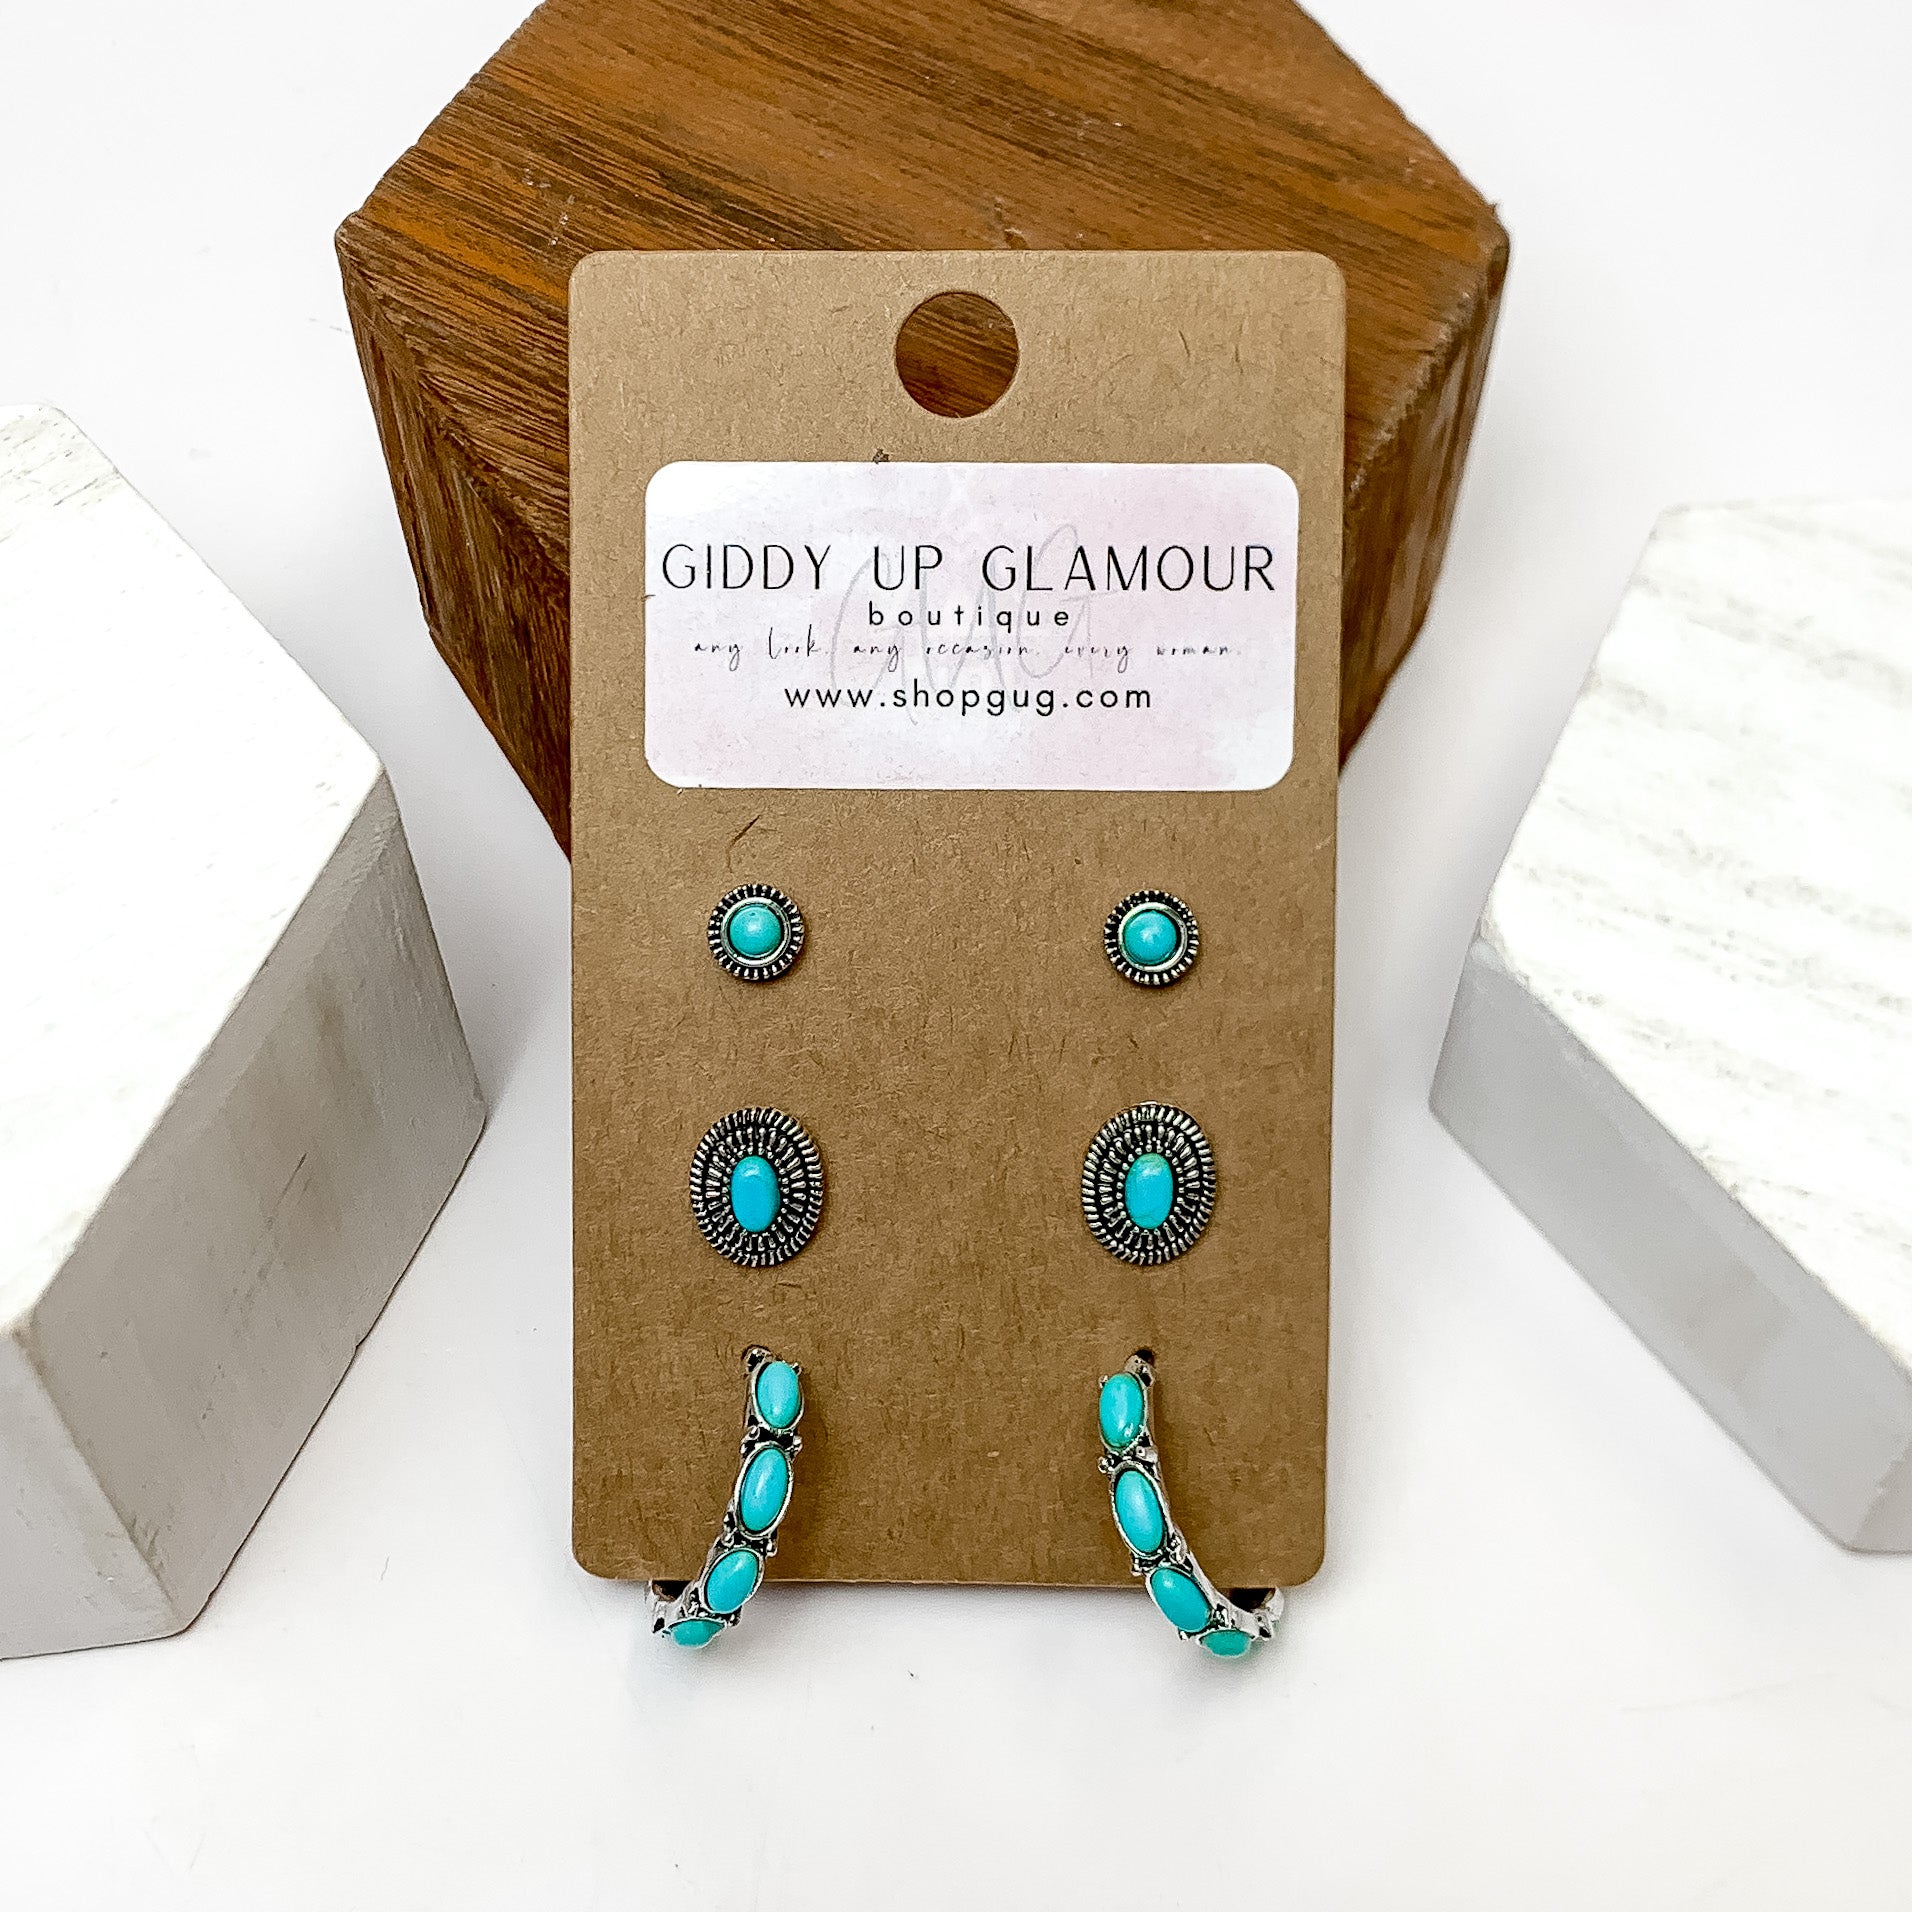 Set Of Three | Stud and Hoop Silver Tone Earring Set in Turquoise. These earring are pictured laying against a wooden block with a white background.